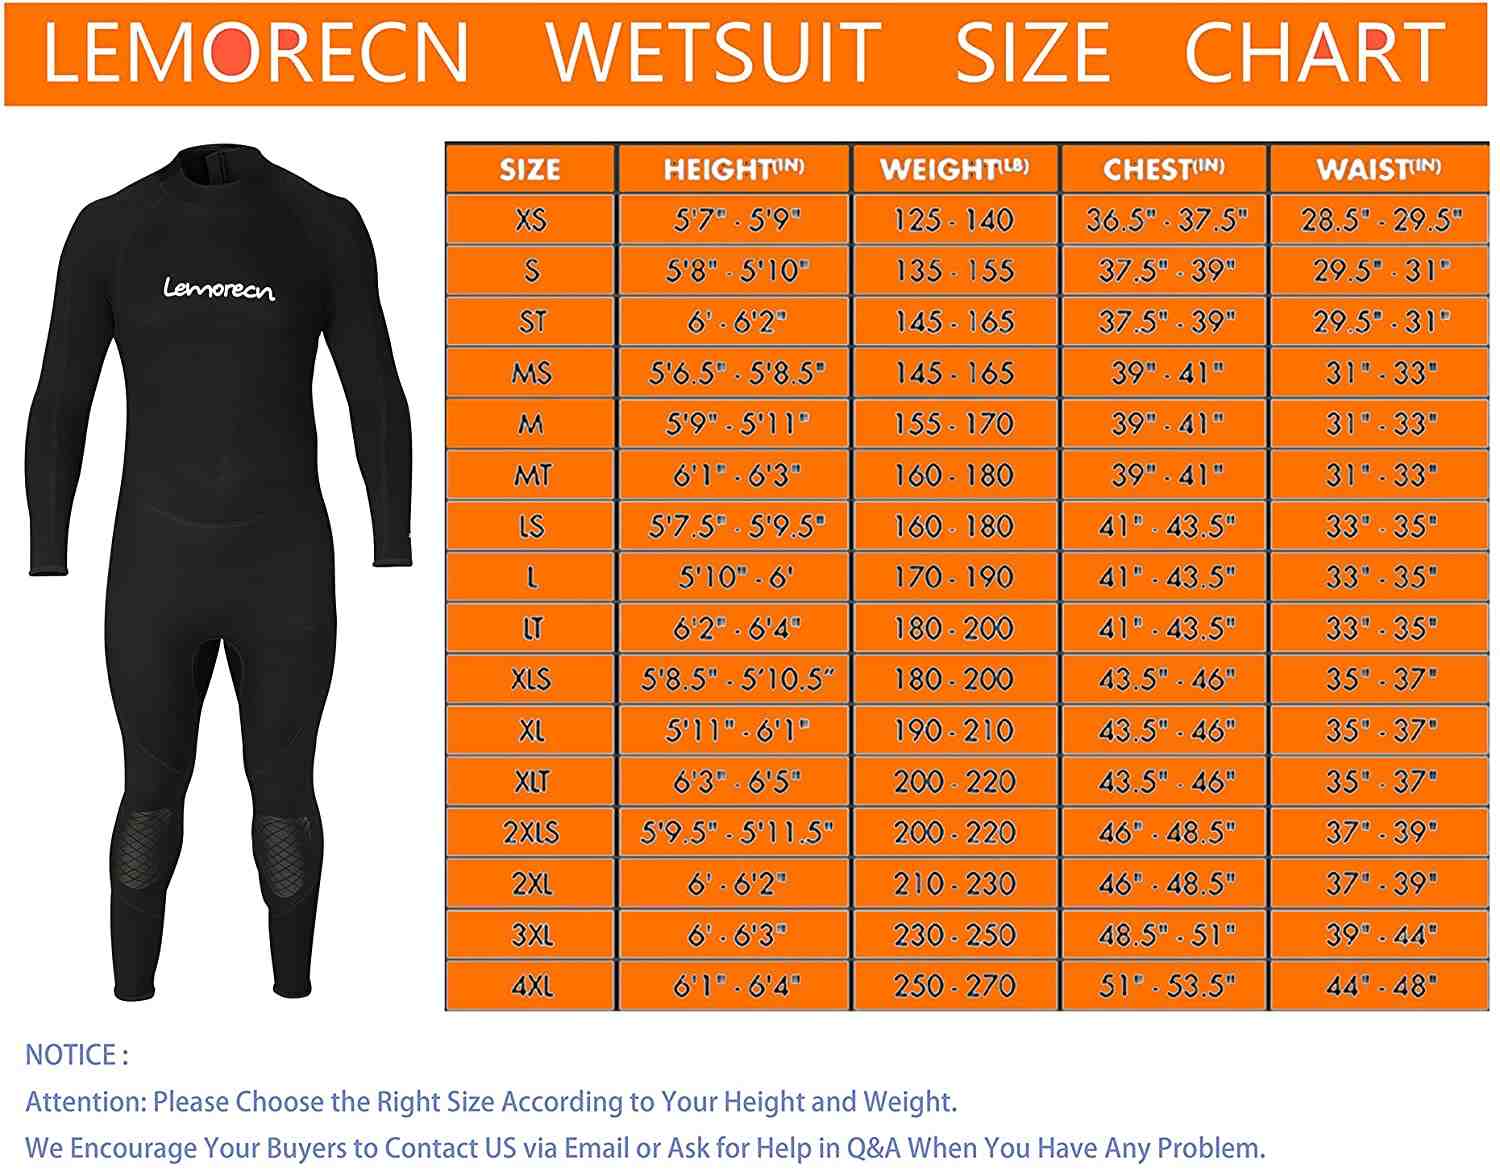 Do wetsuits get looser over time?